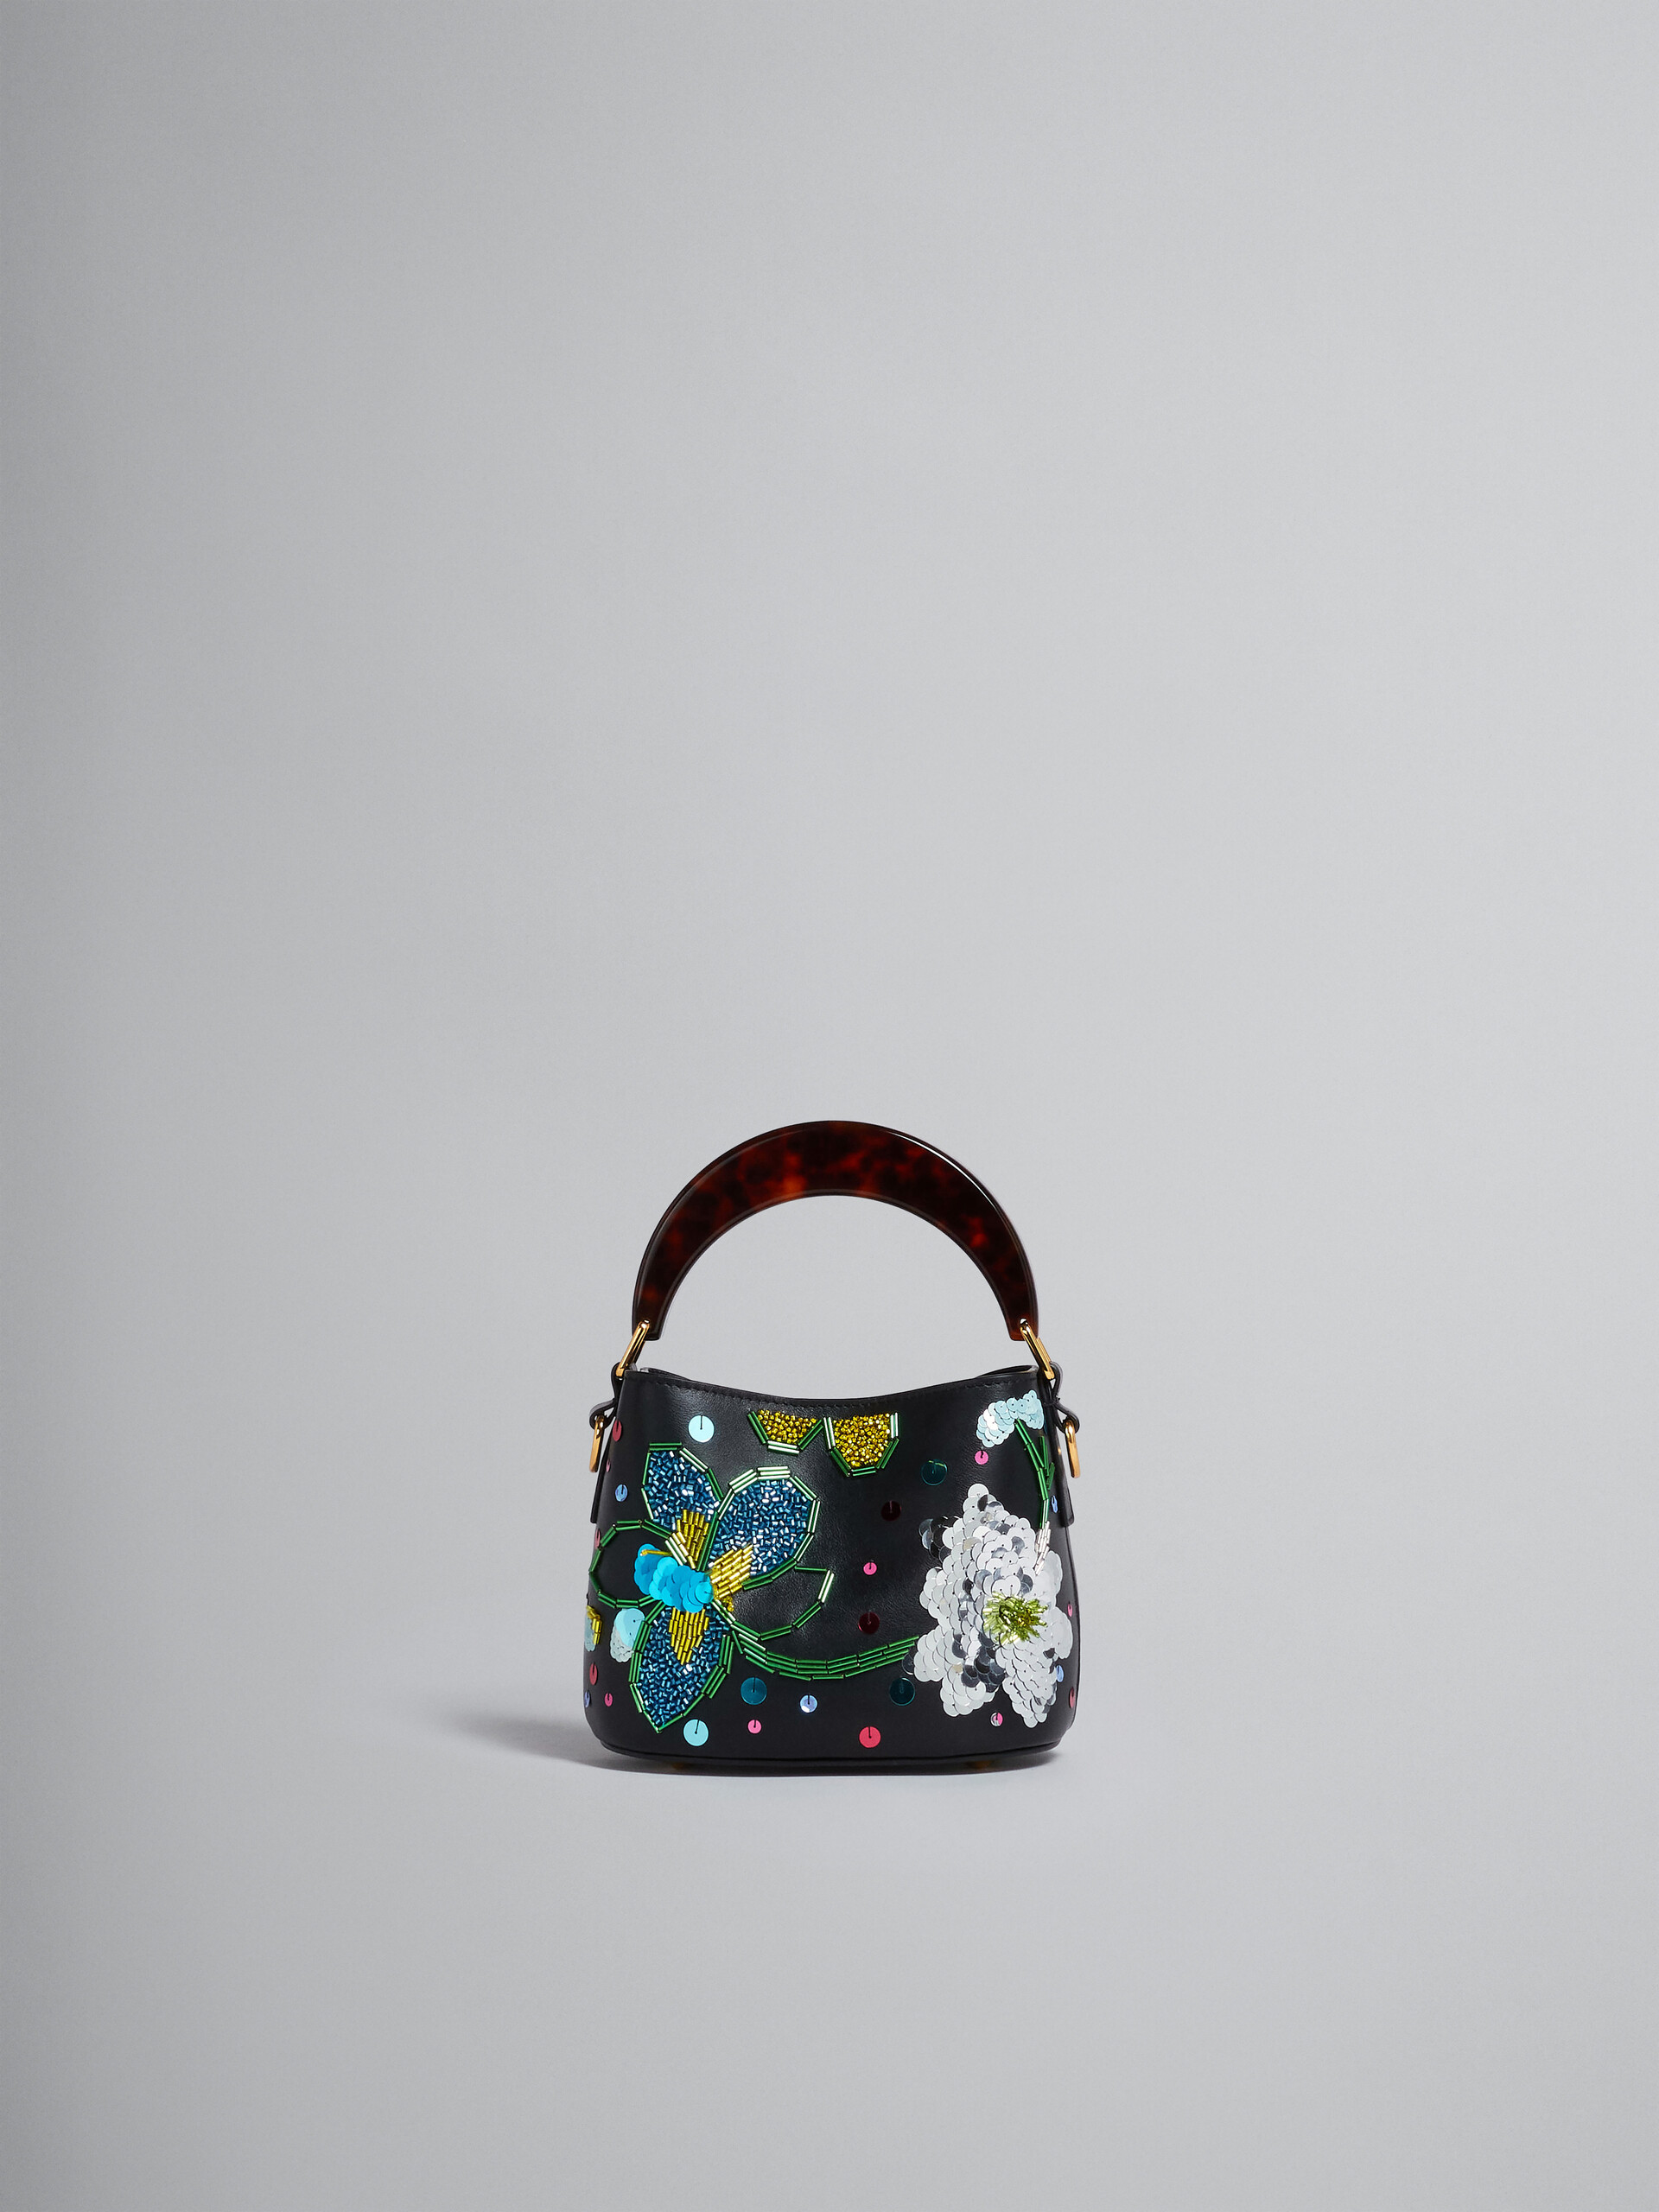 Venice Mini Bucket in embroidered black leather - Shoulder Bags - Image 1